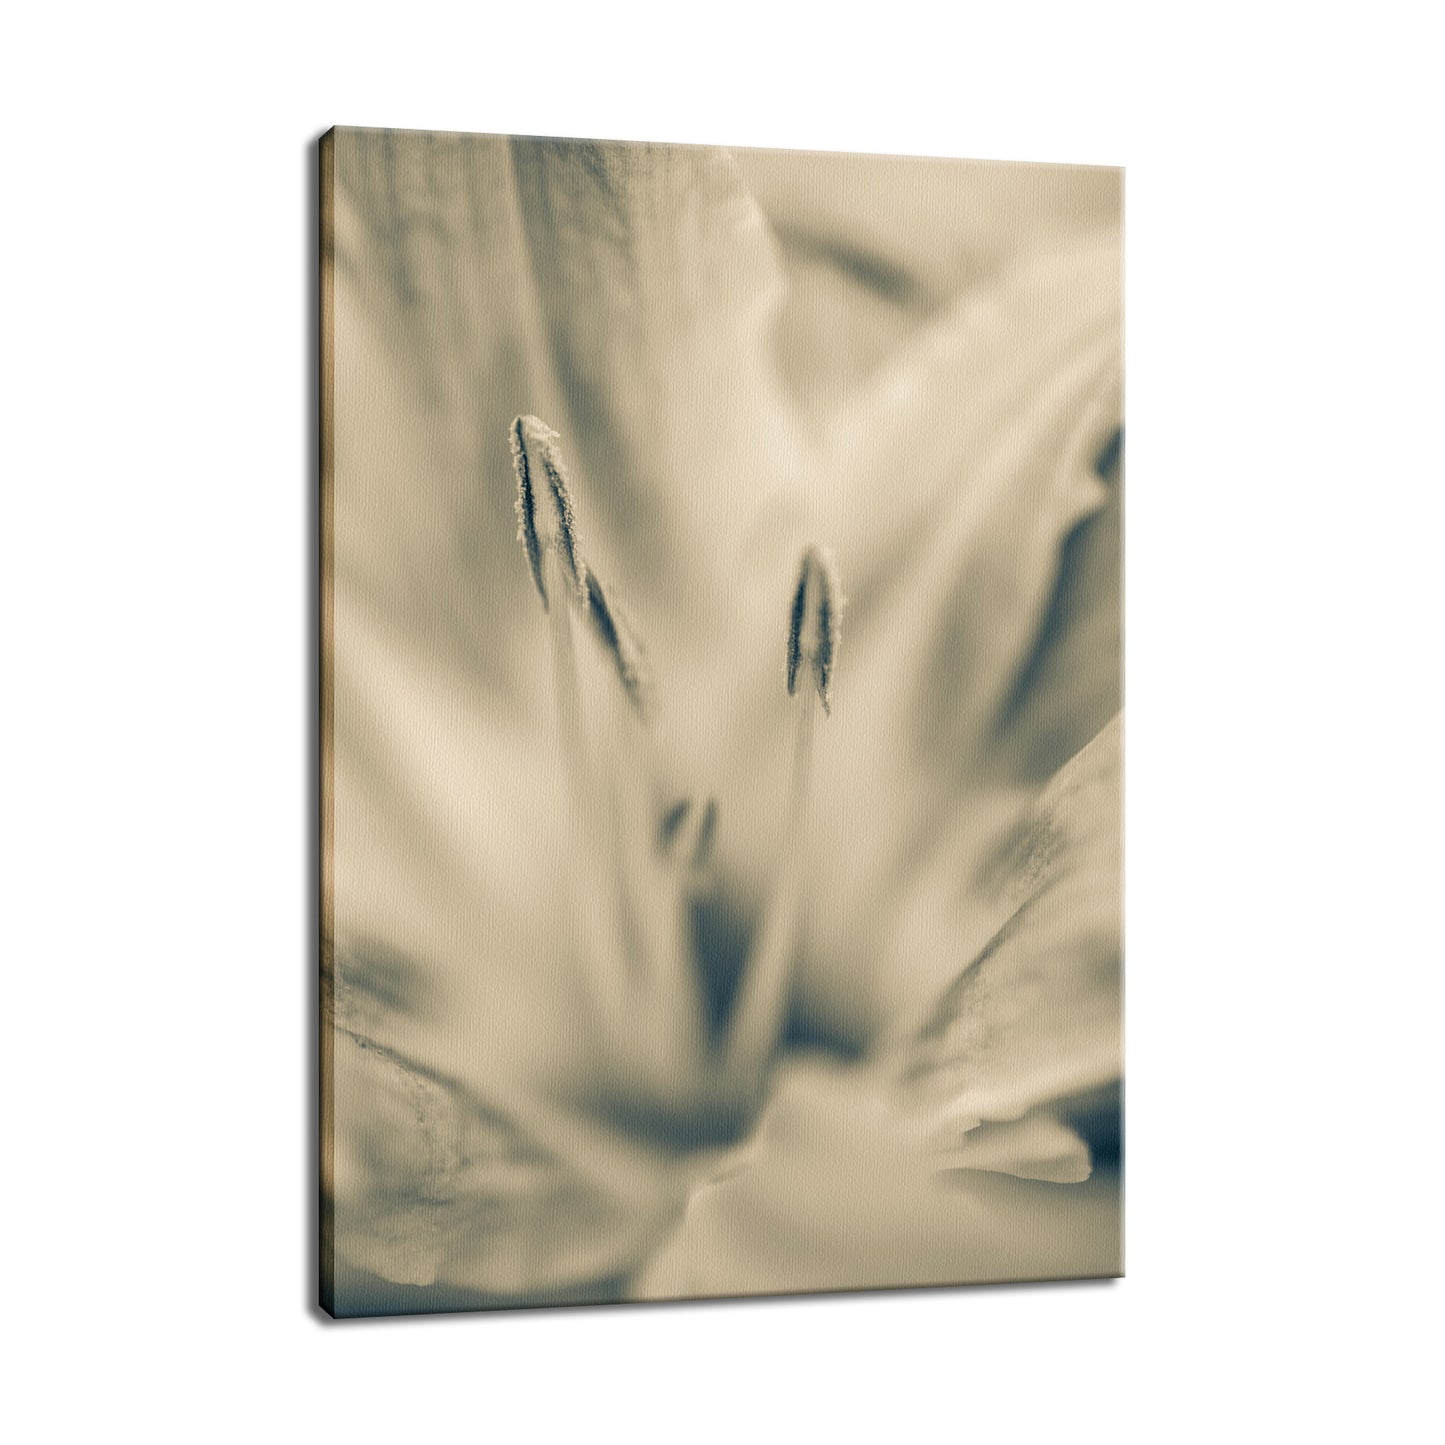 Calm Passions - Sepia Nature / Floral Photo Fine Art Canvas Wall Art Prints  - PIPAFINEART